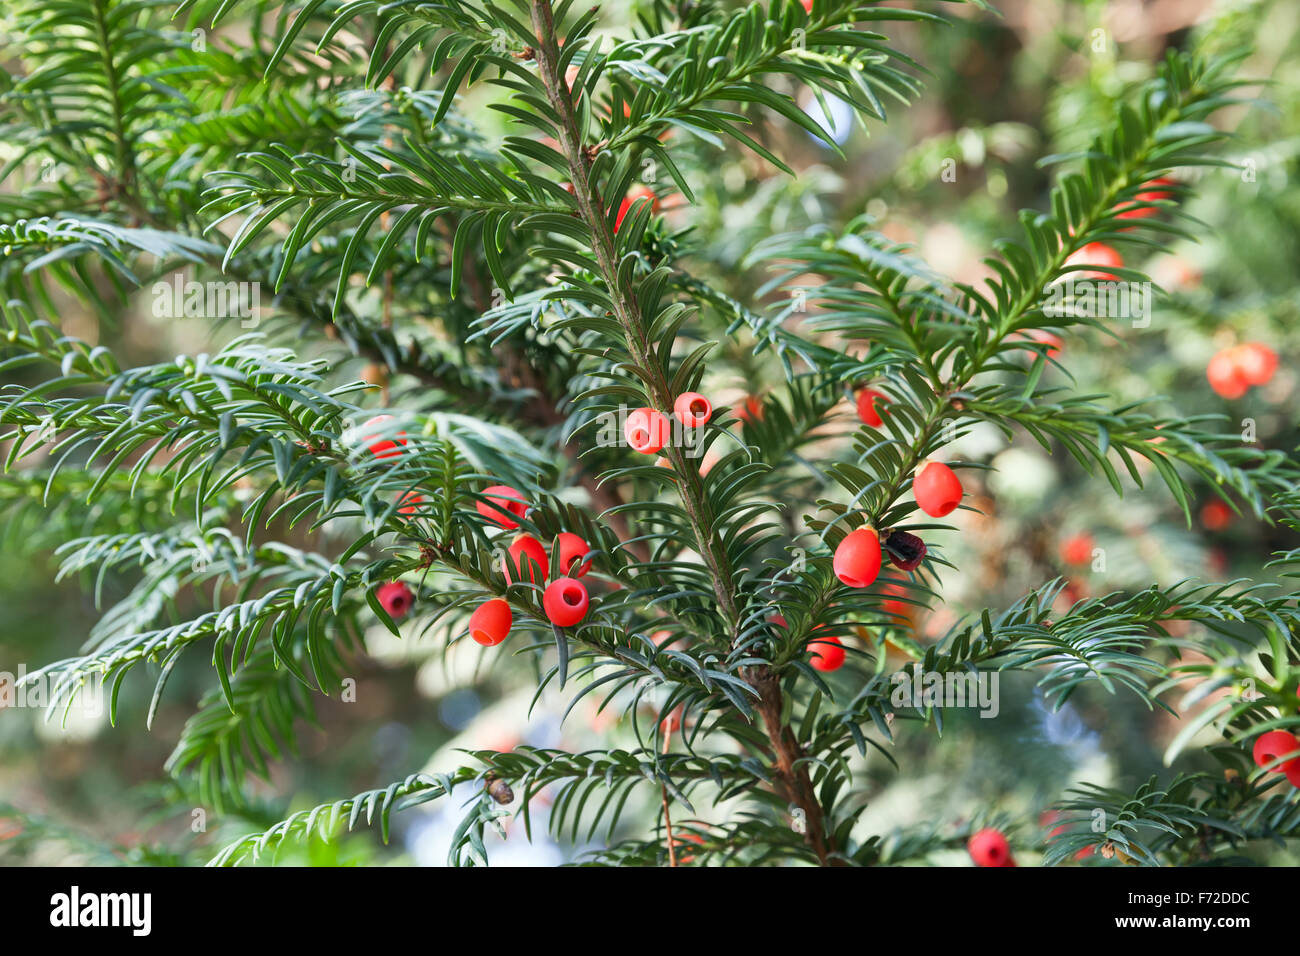 Red berries growing on evergreen yew tree branches Stock Photo